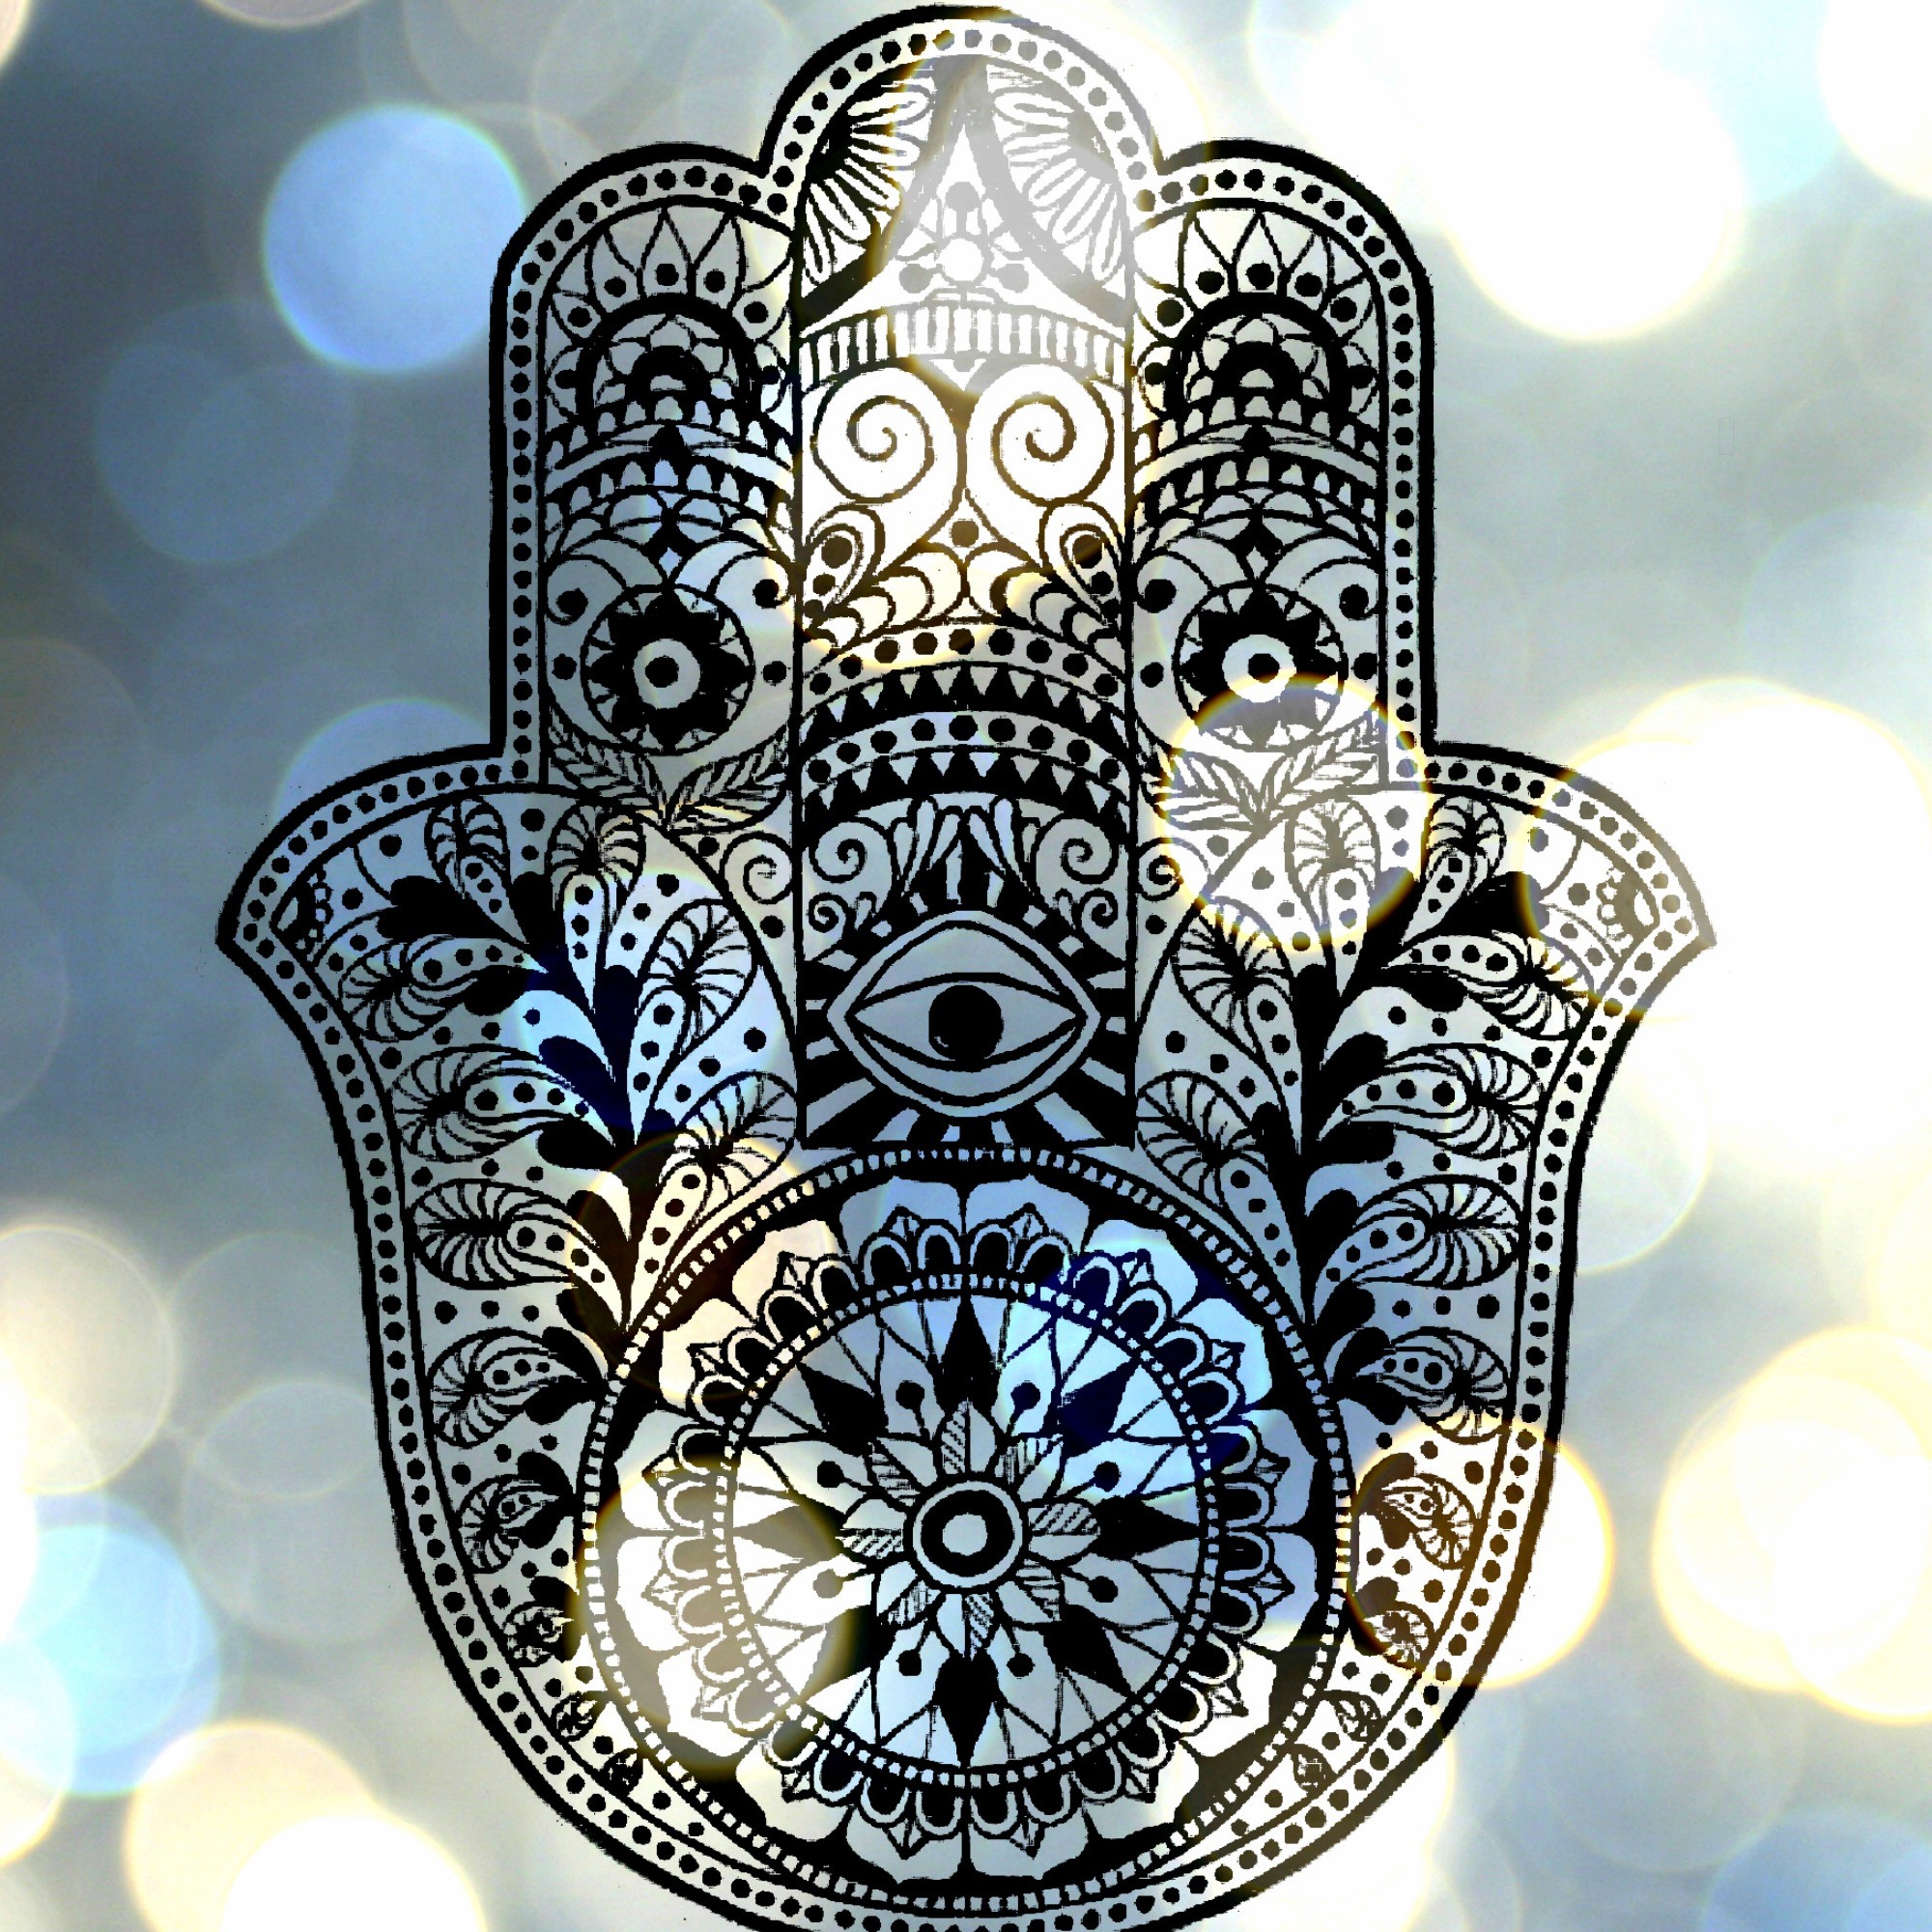 2000x2000 Search Results for “hamsa iphone 5 wallpaper” – Adorable Wallpapers